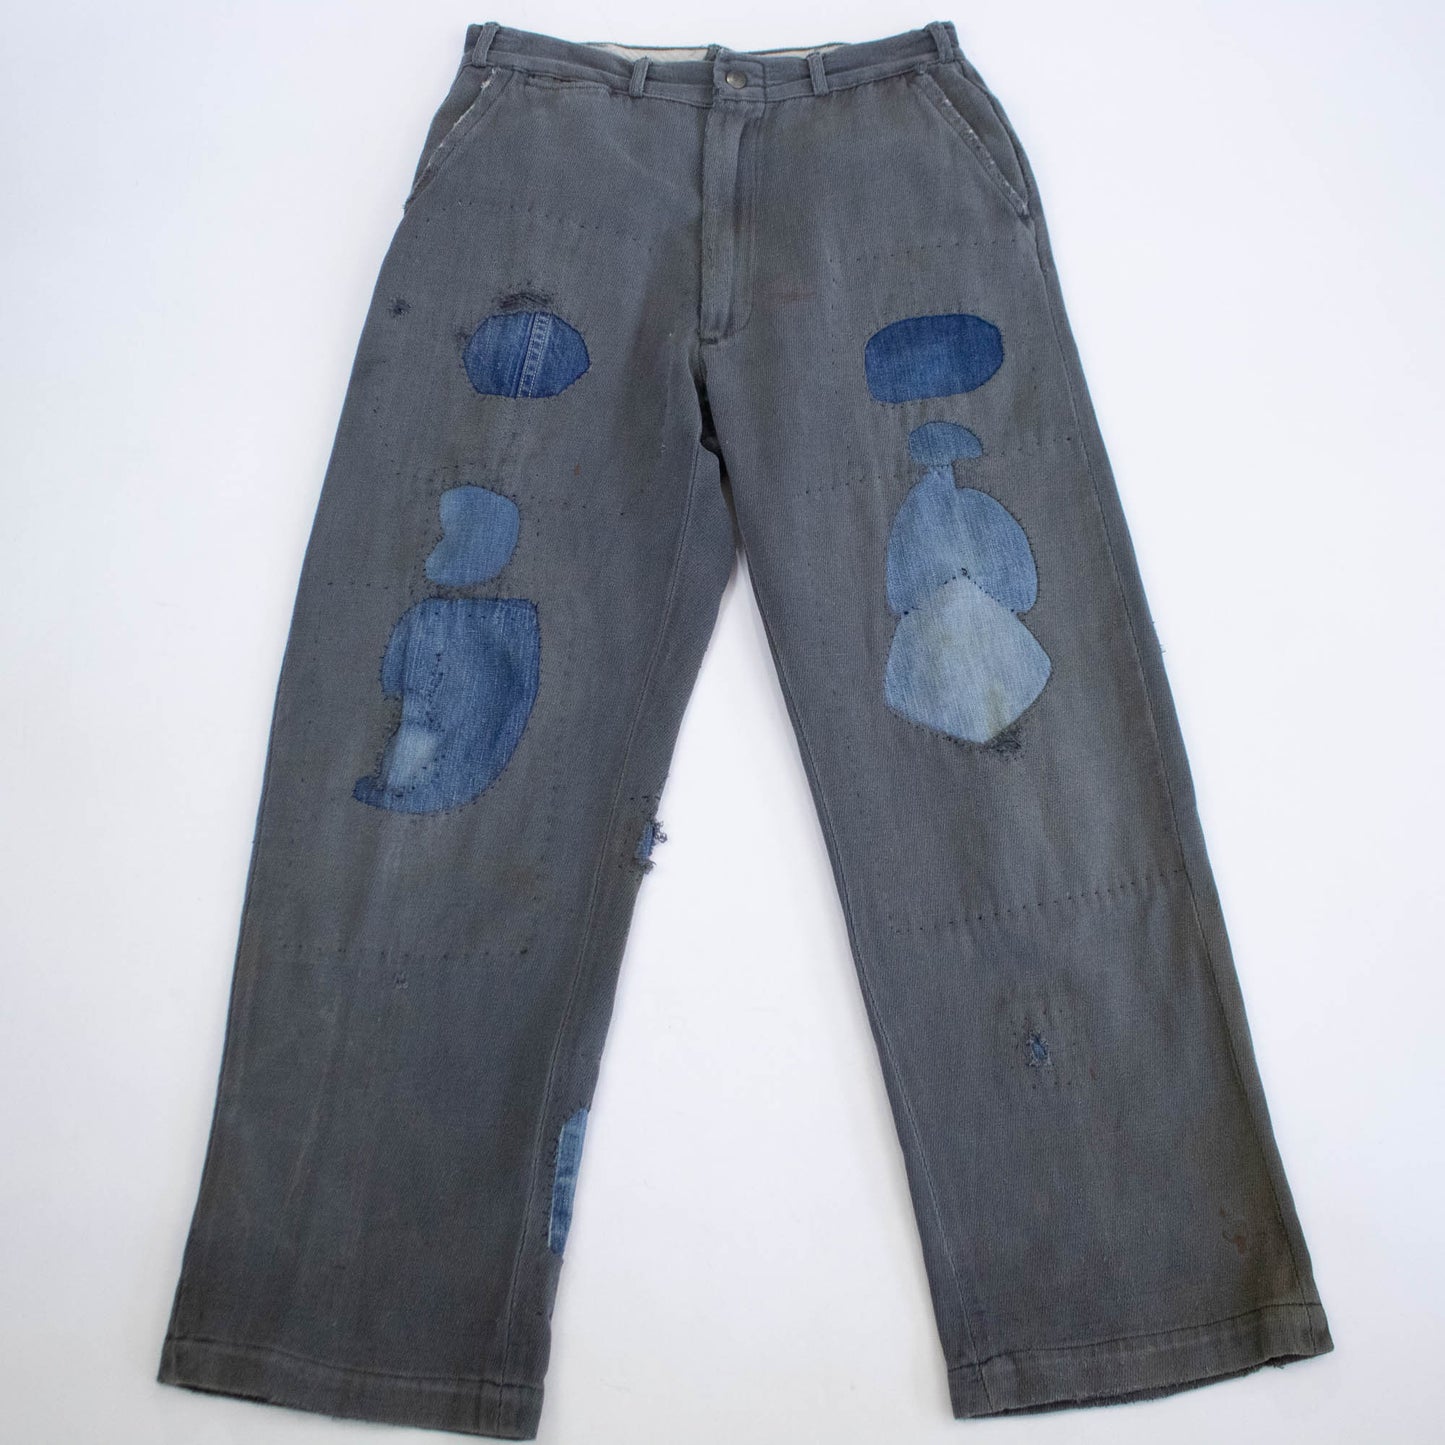 Pointer Brand 40s/50s Whipcord Pants with Original Denim Repairs